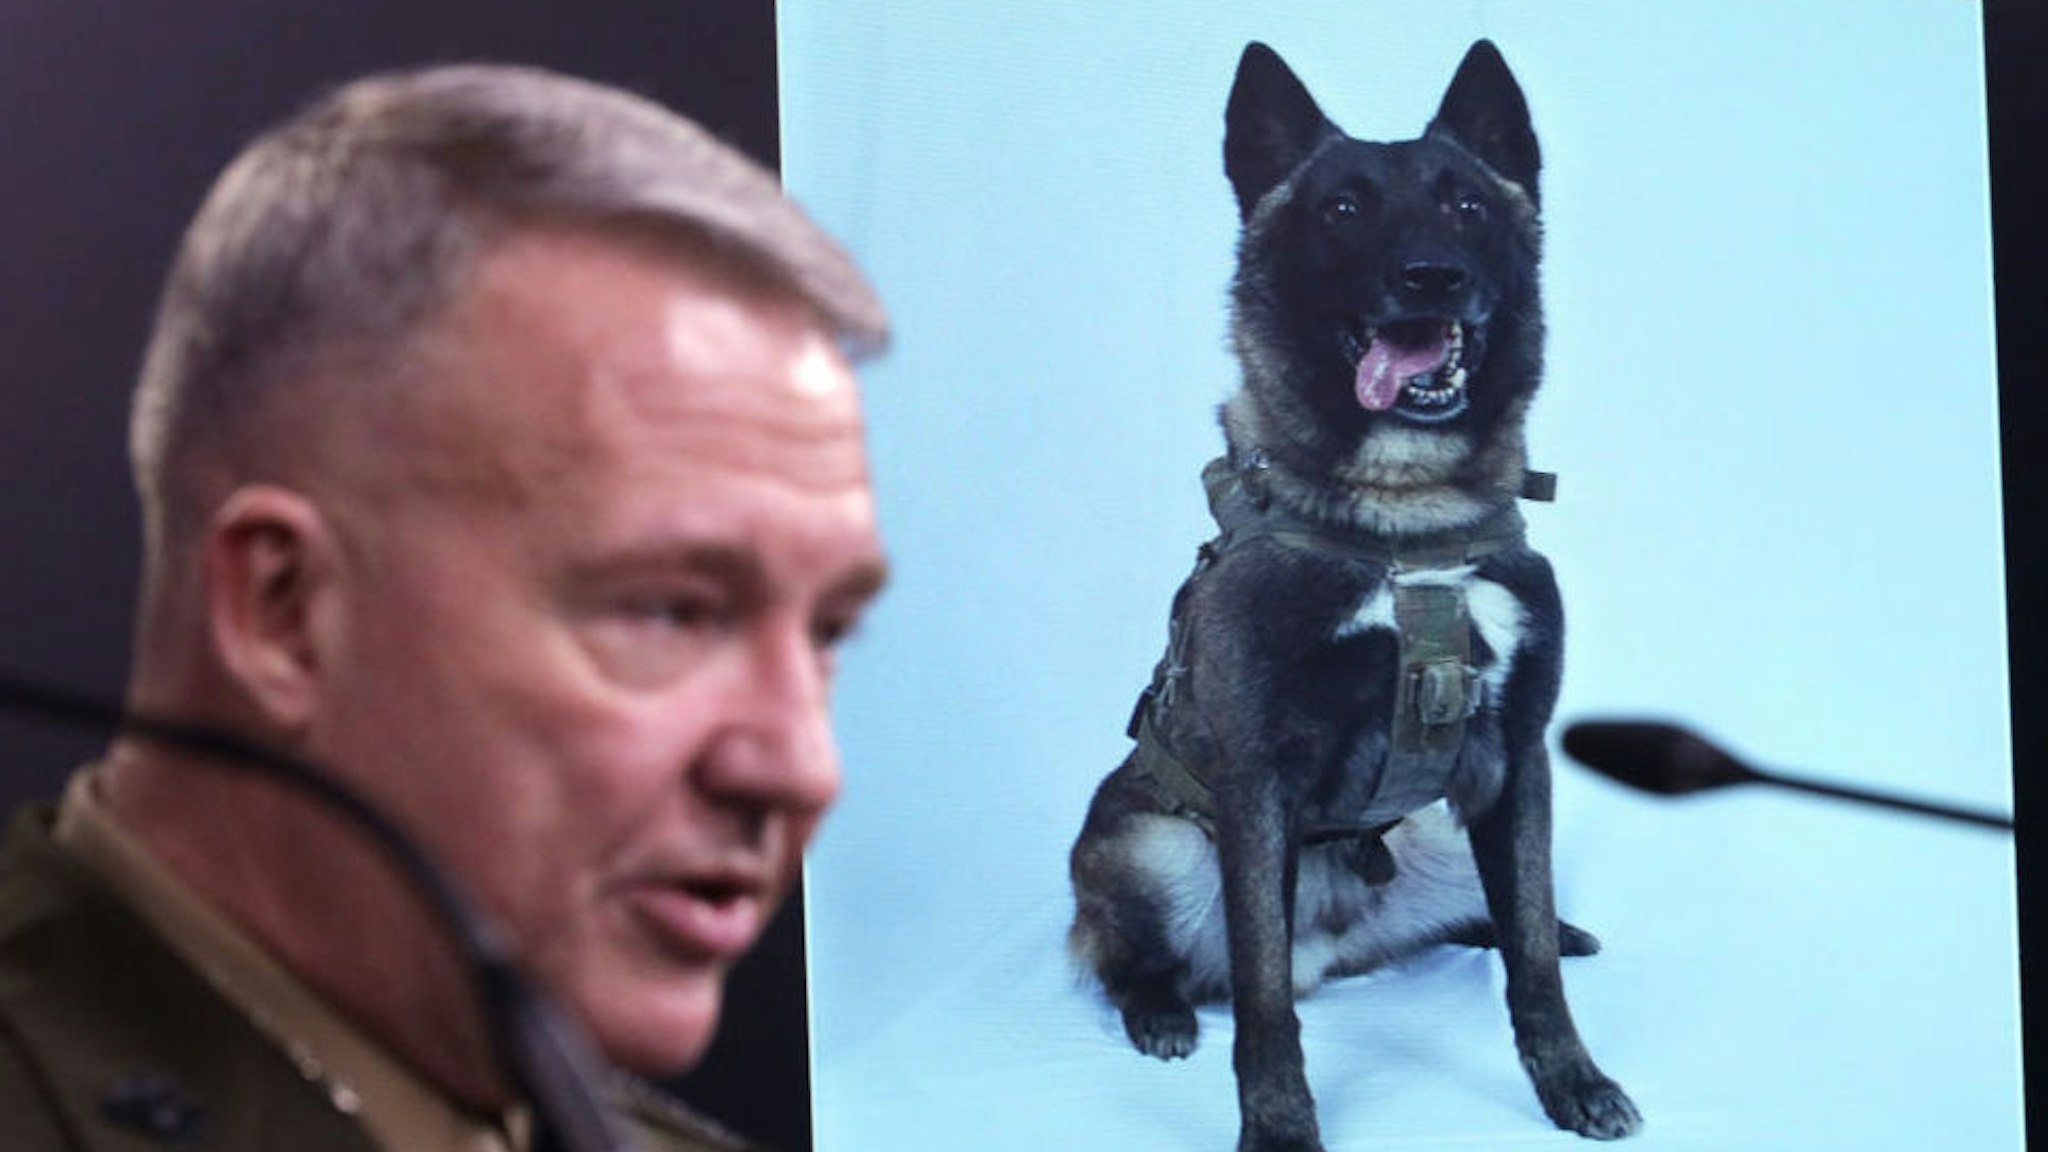 ARLINGTON, VIRGINIA - OCTOBER 30: U.S. Marine Corps Gen. Kenneth McKenzie, commander of U.S. Central Command, speaks as a picture of the canine that was part of the operation, is on display during a press briefing October 30, 2019 at the Pentagon in Arlington, Virginia. Gen. McKenzie and Hoffman spoke to the media to provide an update on the special operations raid that targeted former ISIS leader Abu Bakr al-Baghdadi in Idlib Province, Syria.